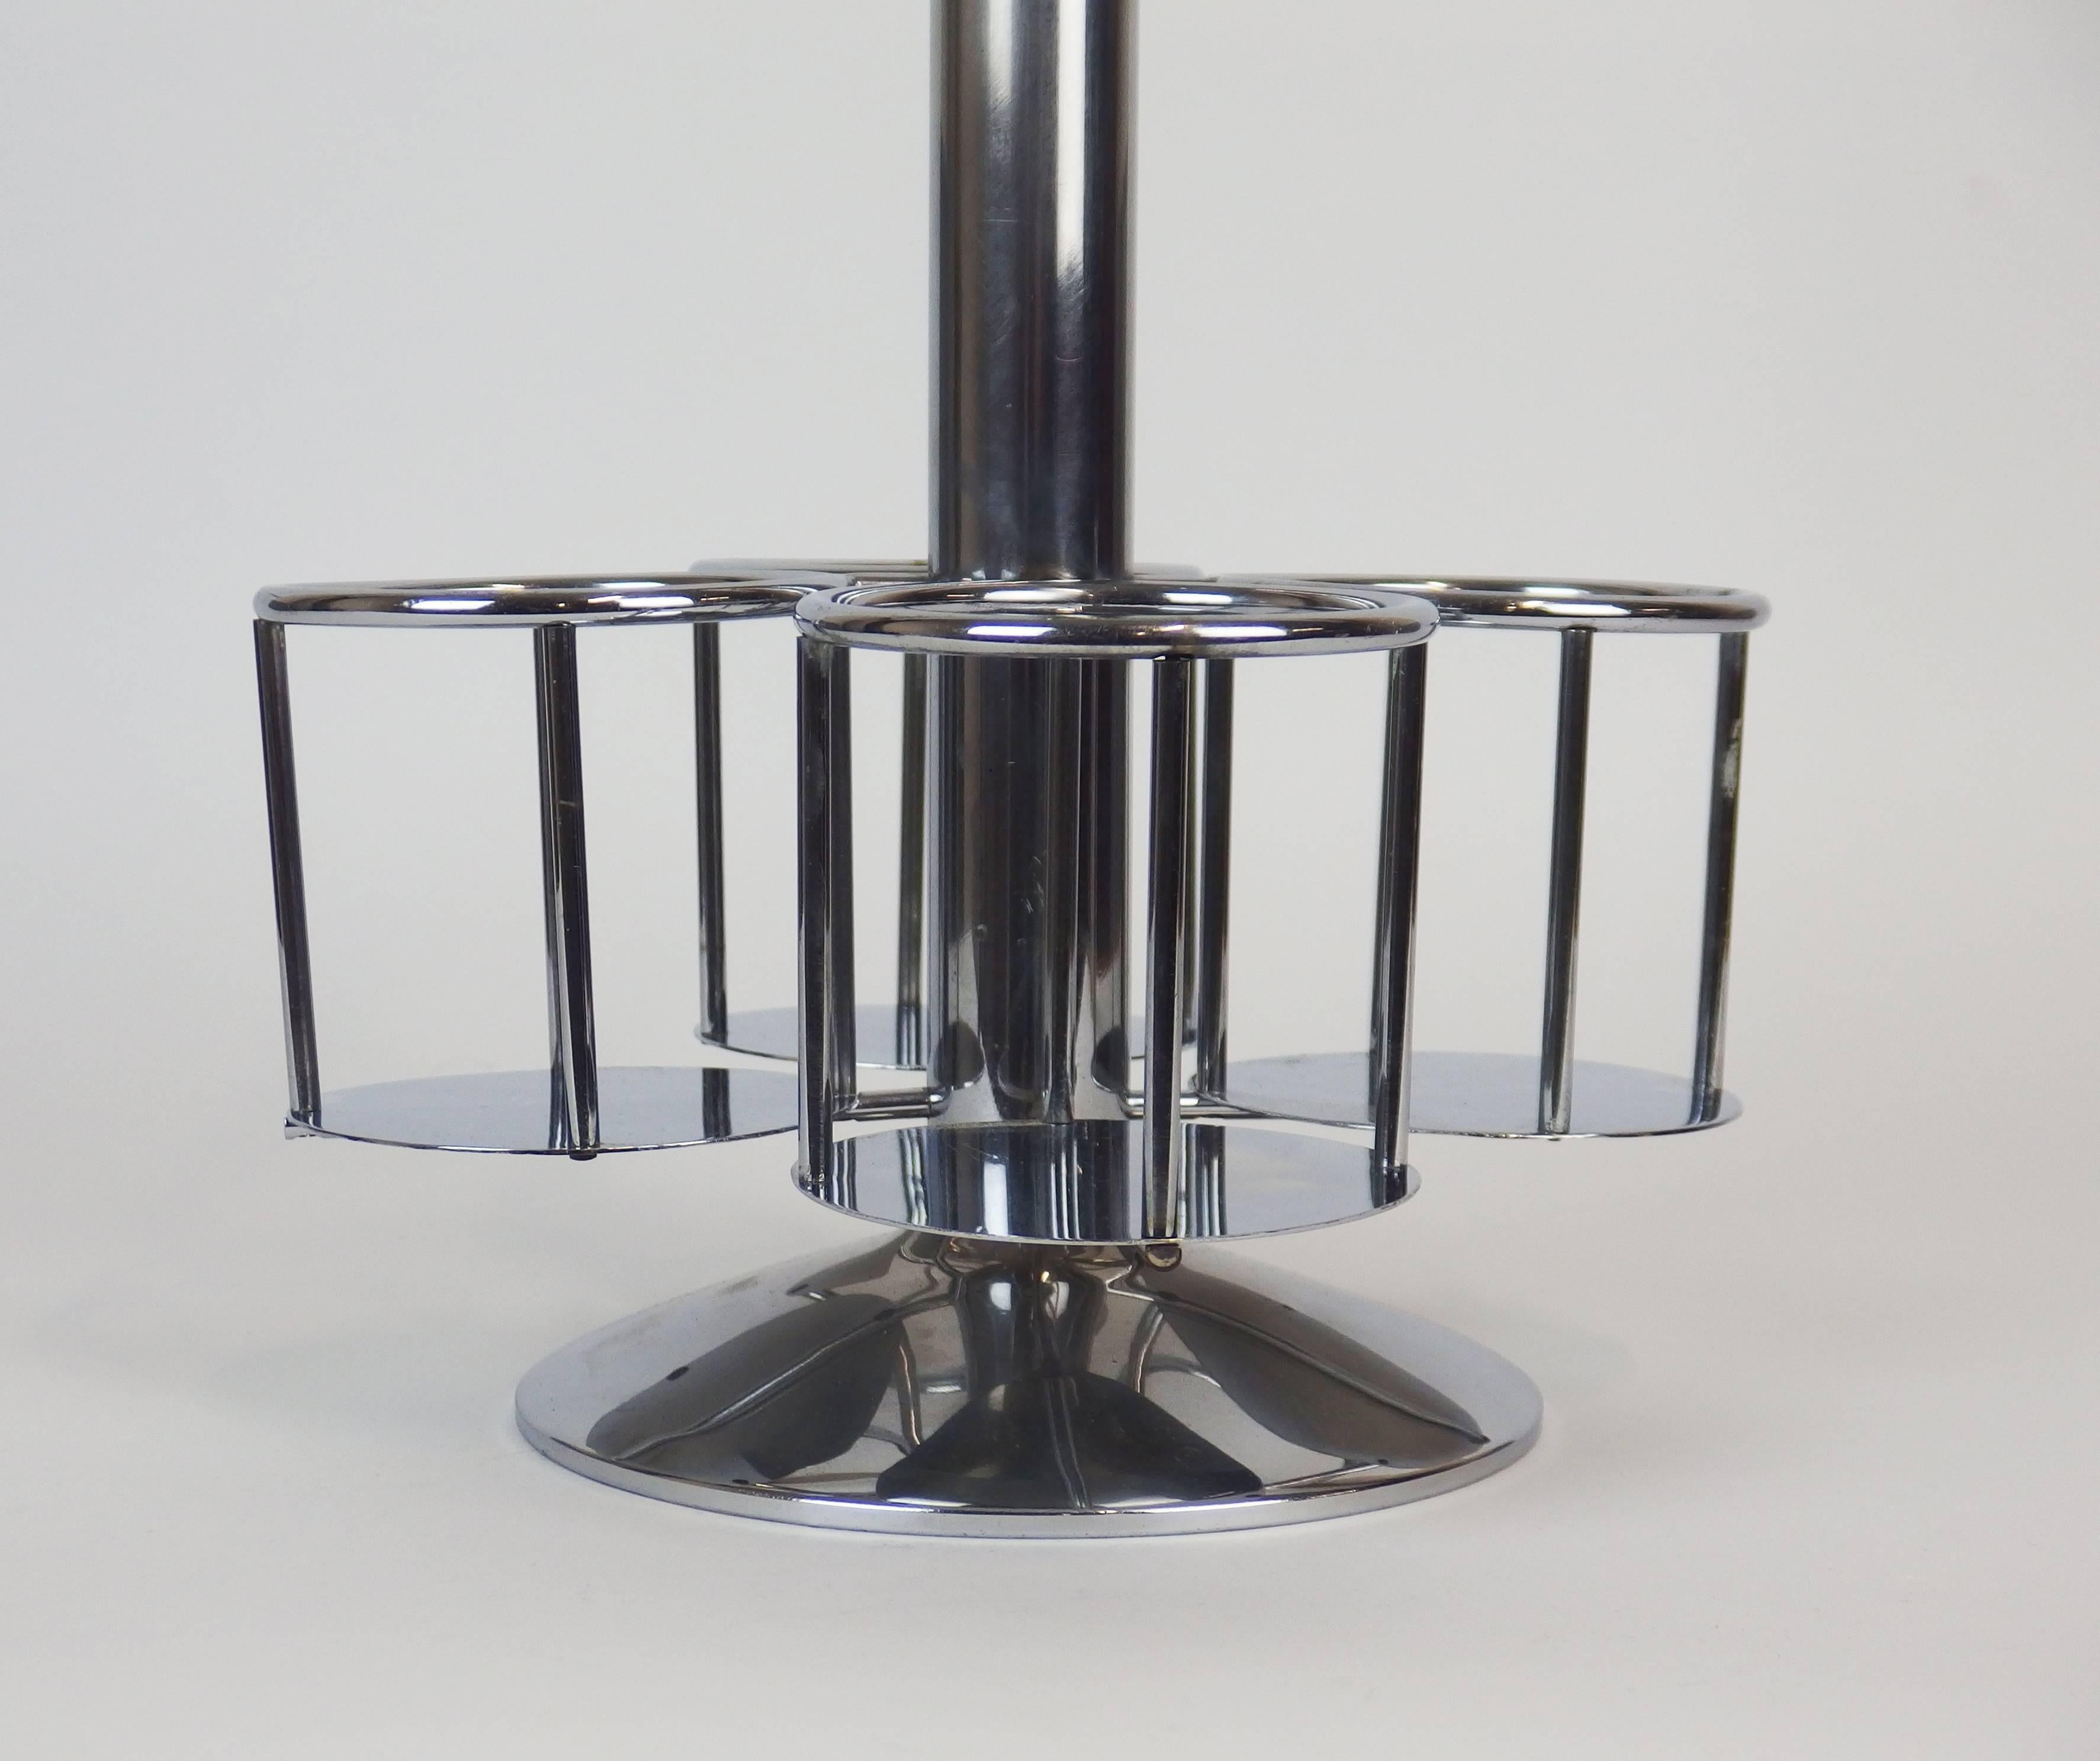 Art Deco Modernist Bottle Holder in the Style of Jacques Adnet In Good Condition For Sale In Janvry, Essonne